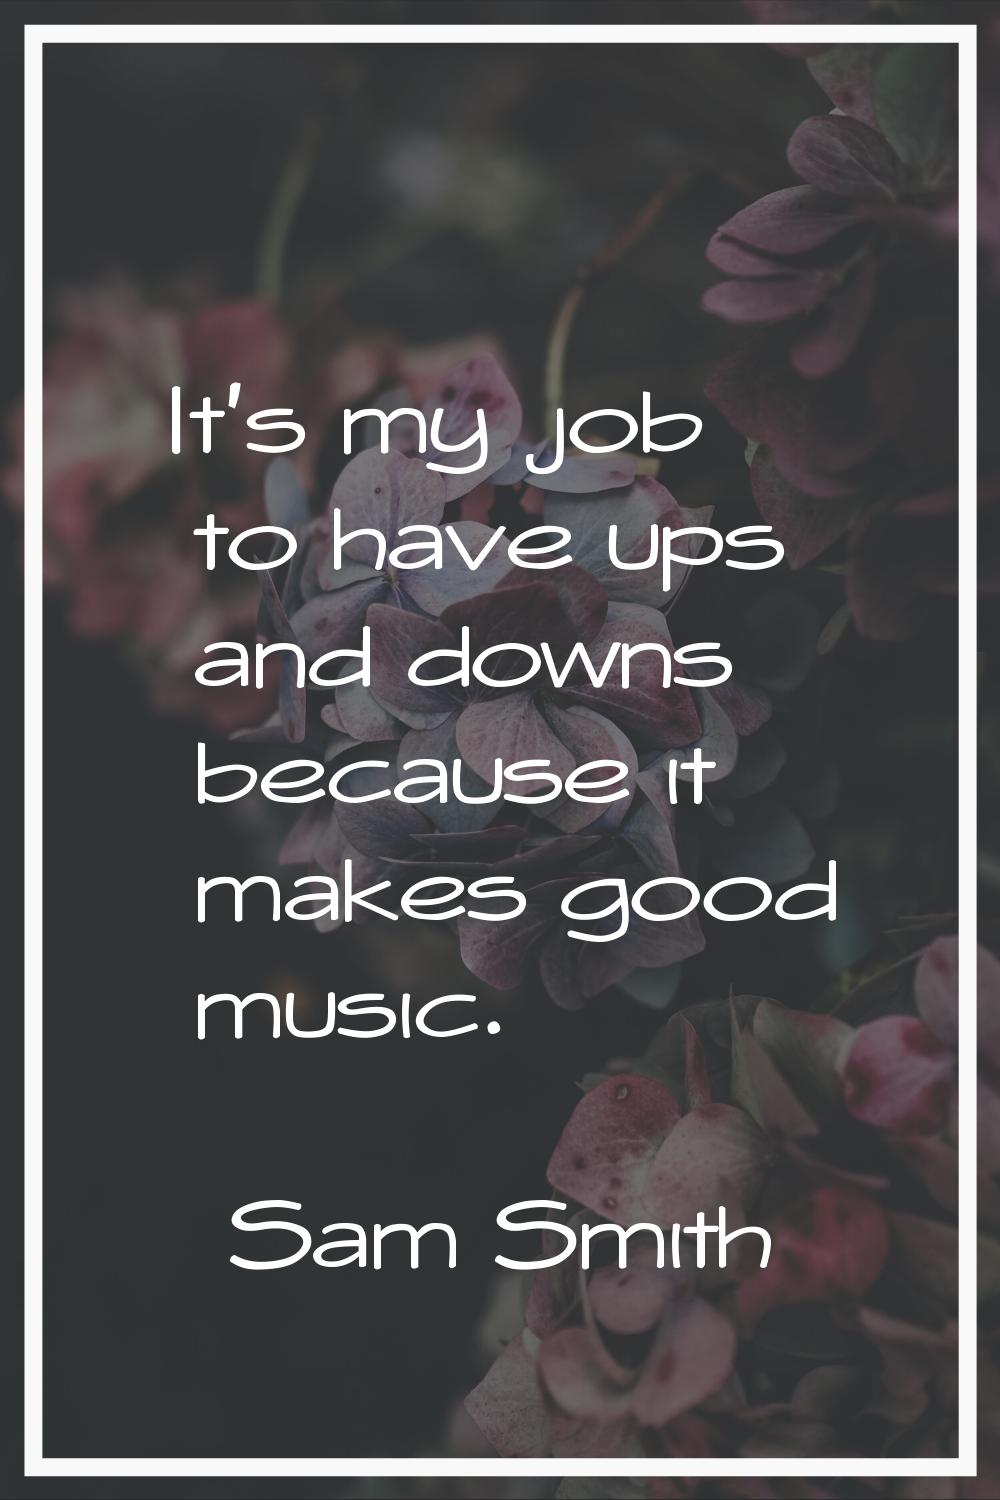 It's my job to have ups and downs because it makes good music.